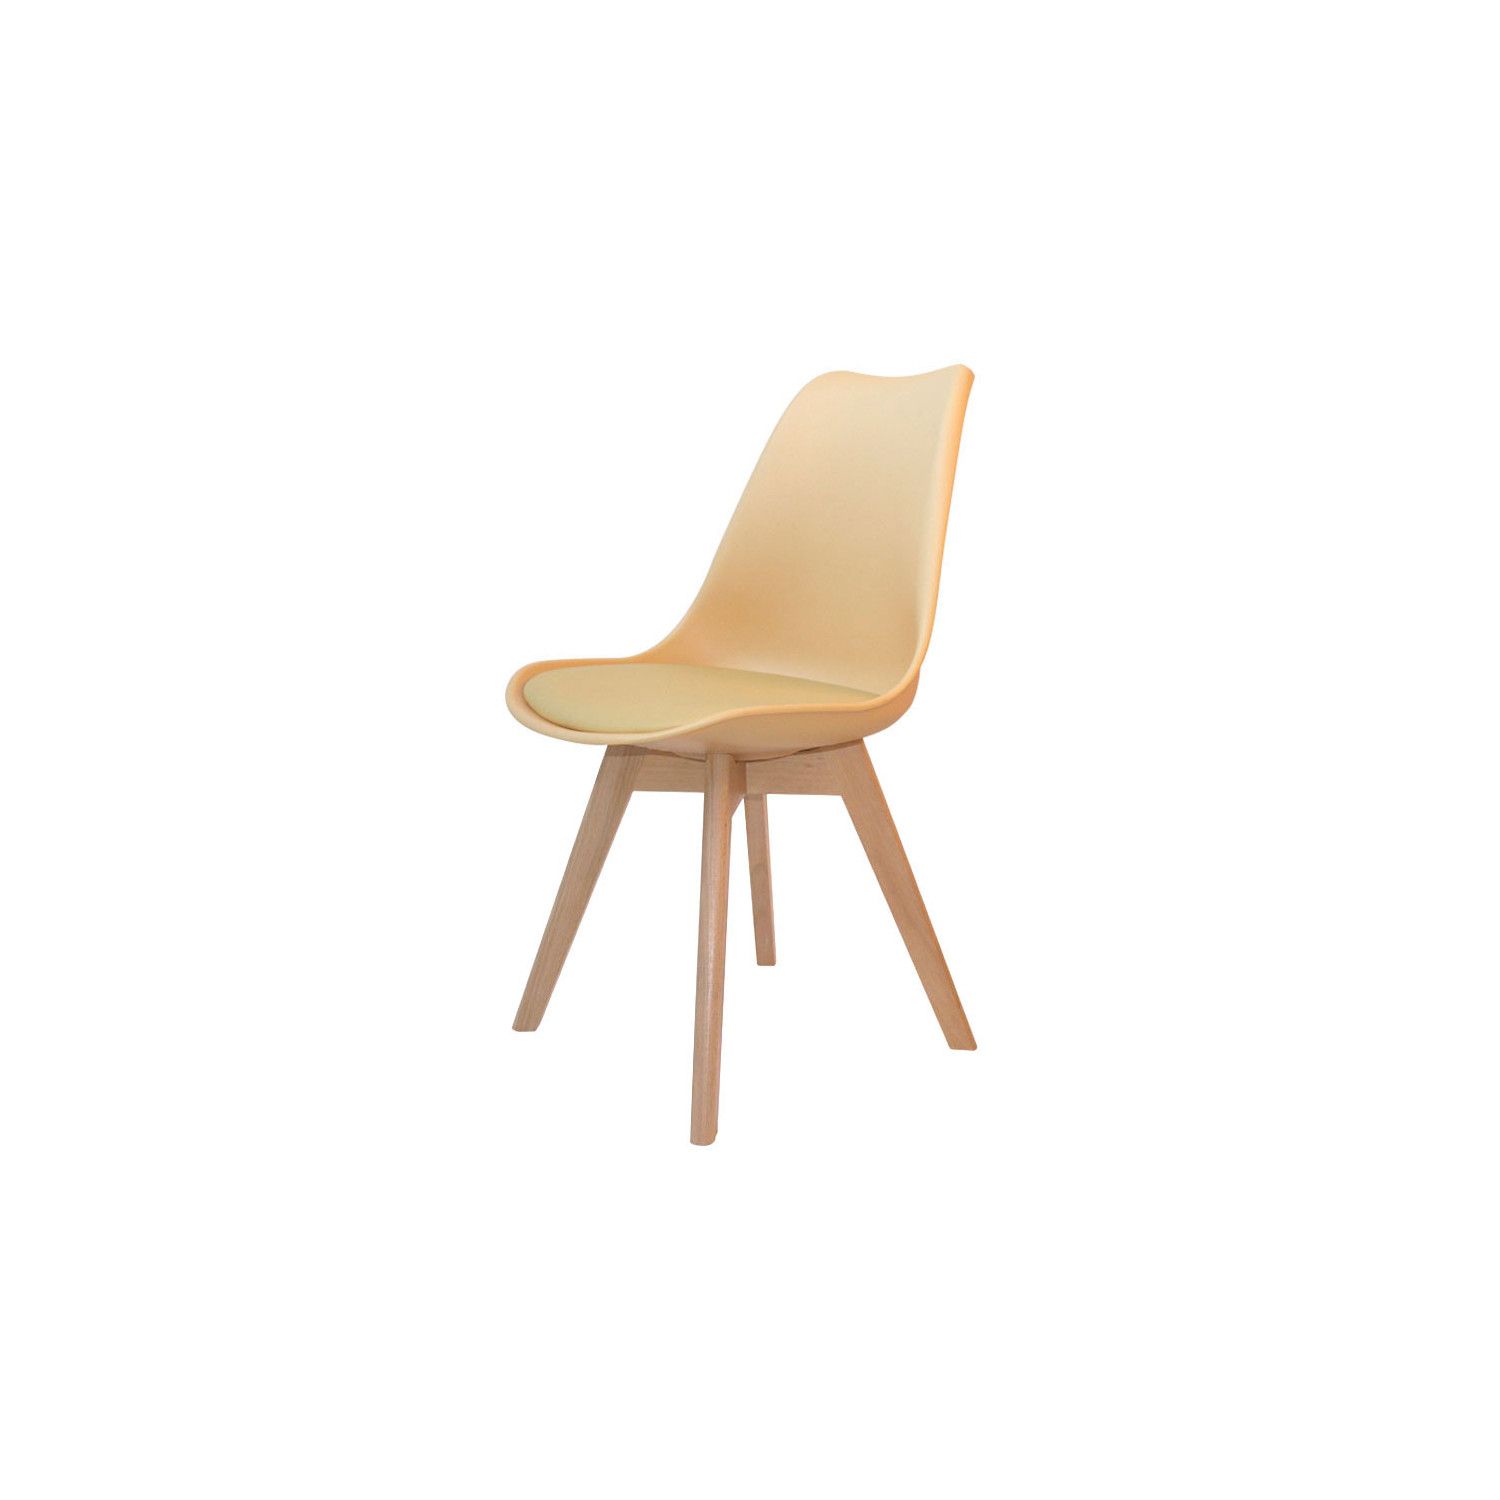 SILLA NEW TOWER WOOD VAINILLA EXTRA QUALITY - Sillas Tower 